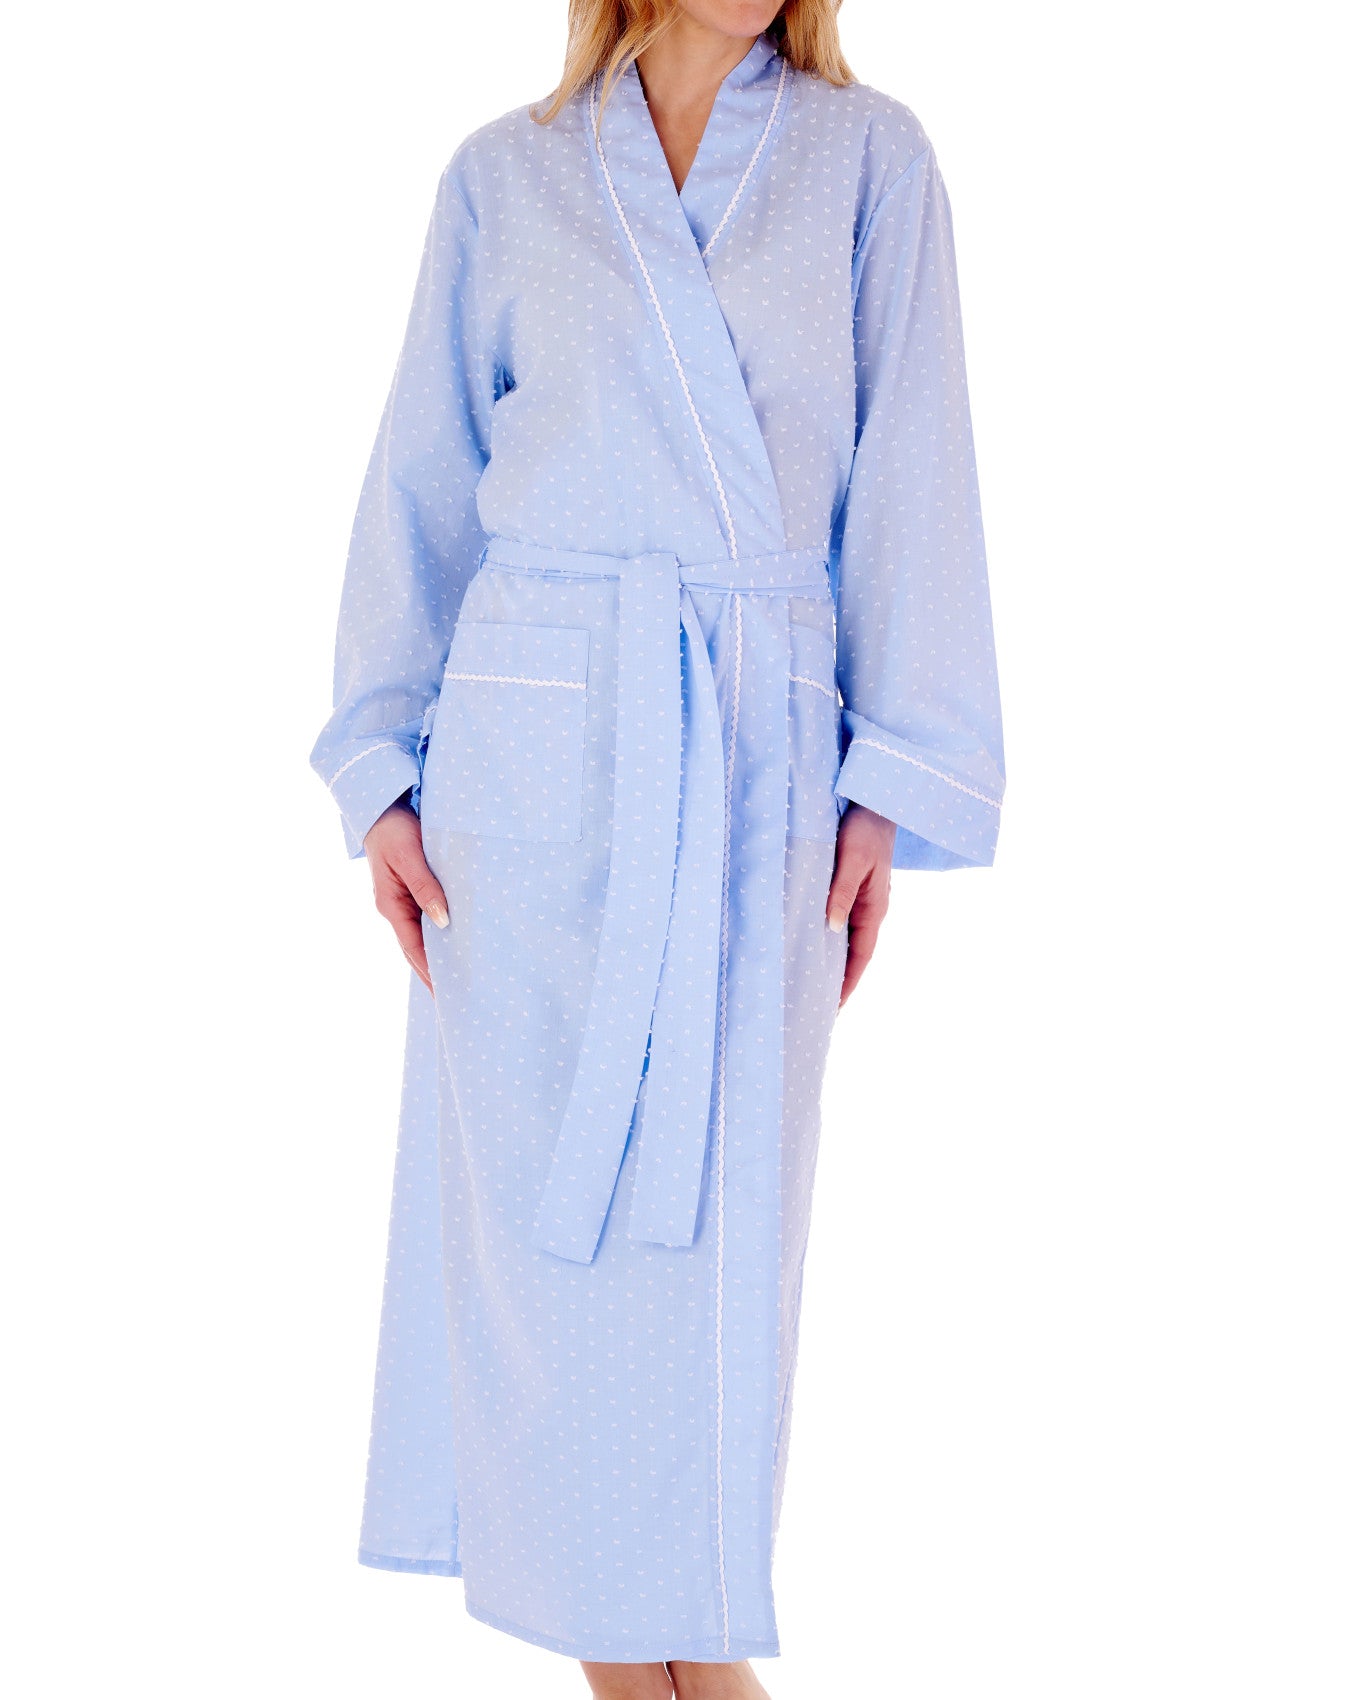 Luxury Bathrobes :: Plush Robes :: Super Soft Red Snow Plush Hooded Women's  Robe - Wholesale bathrobes, Spa robes, Kids robes, Cotton robes, Spa  Slippers, Wholesale Towels